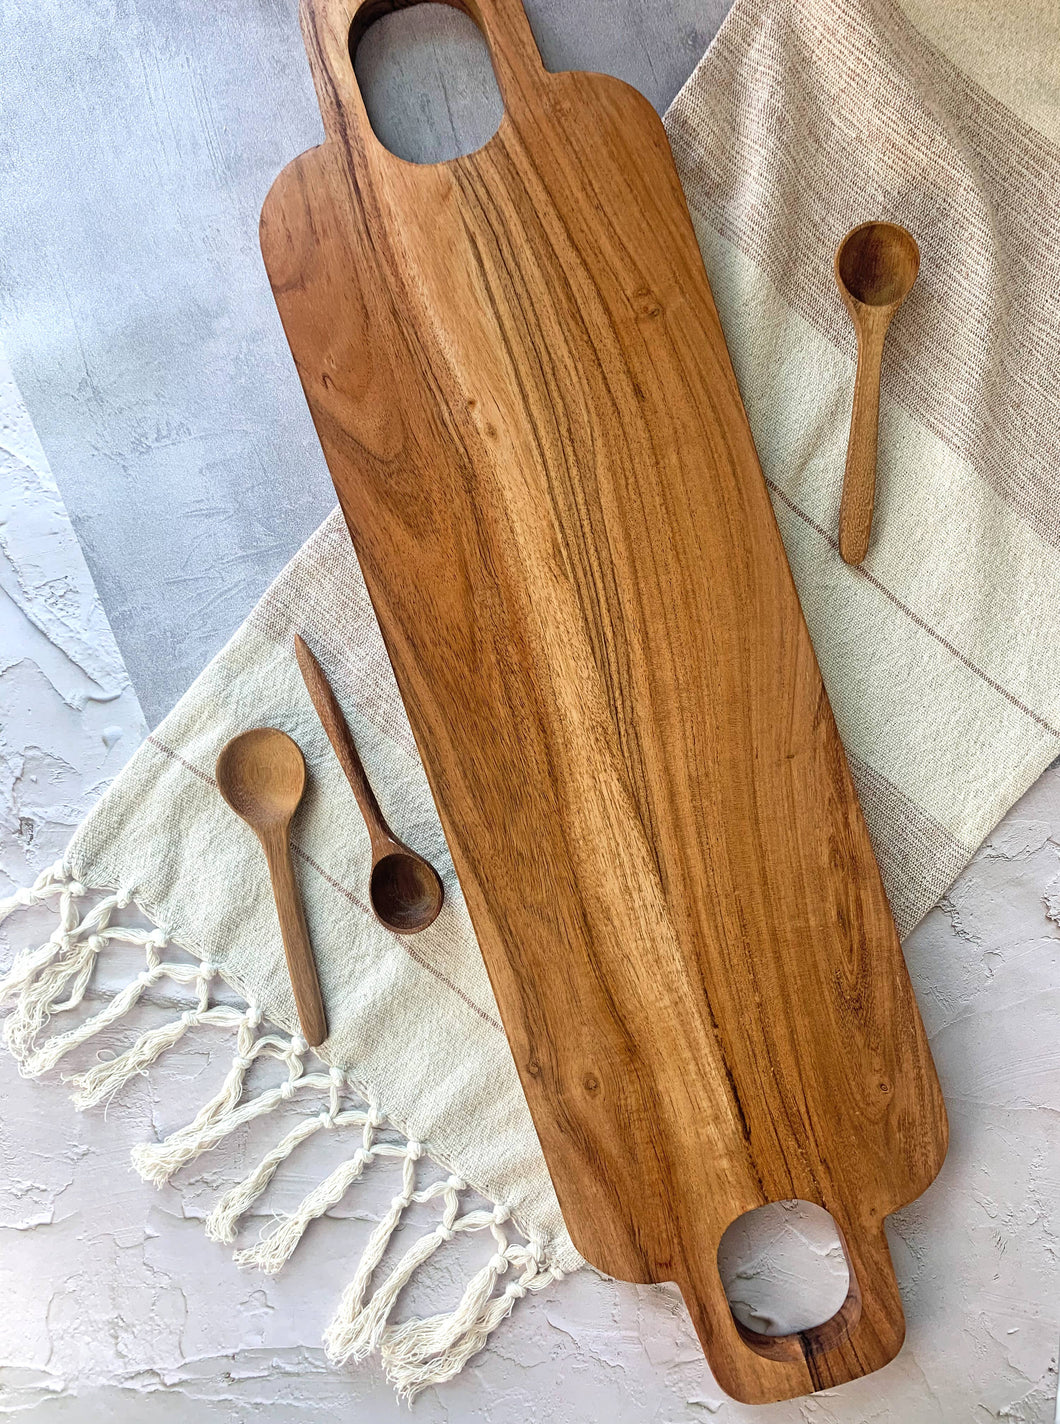 Serving Board Double Handle Large